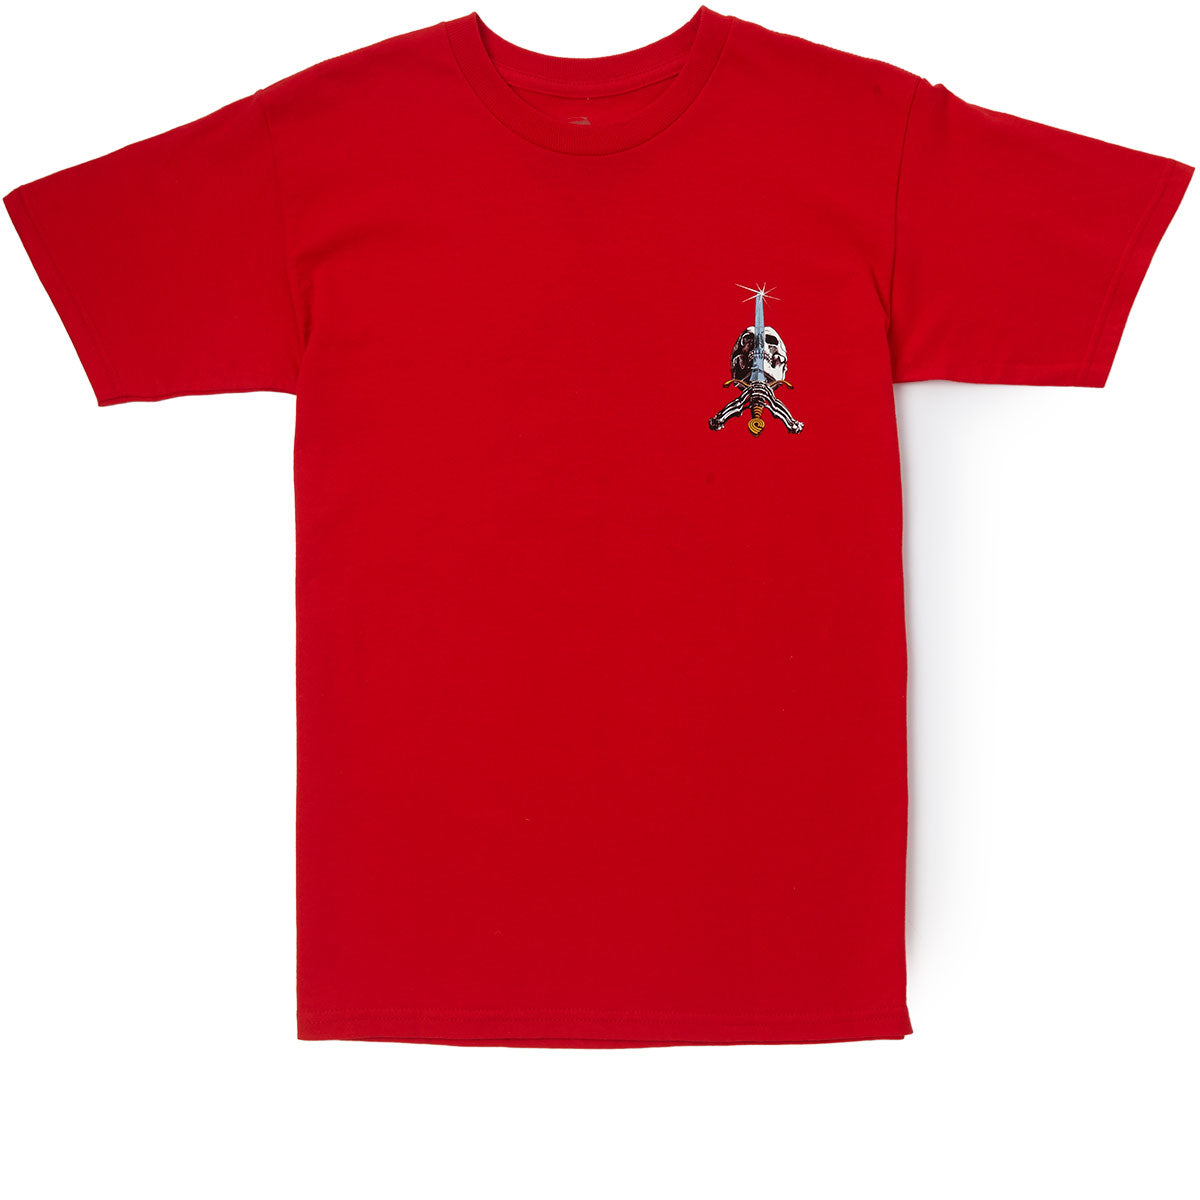 Powell-Peralta Skull And Sword T-Shirt - Red image 2